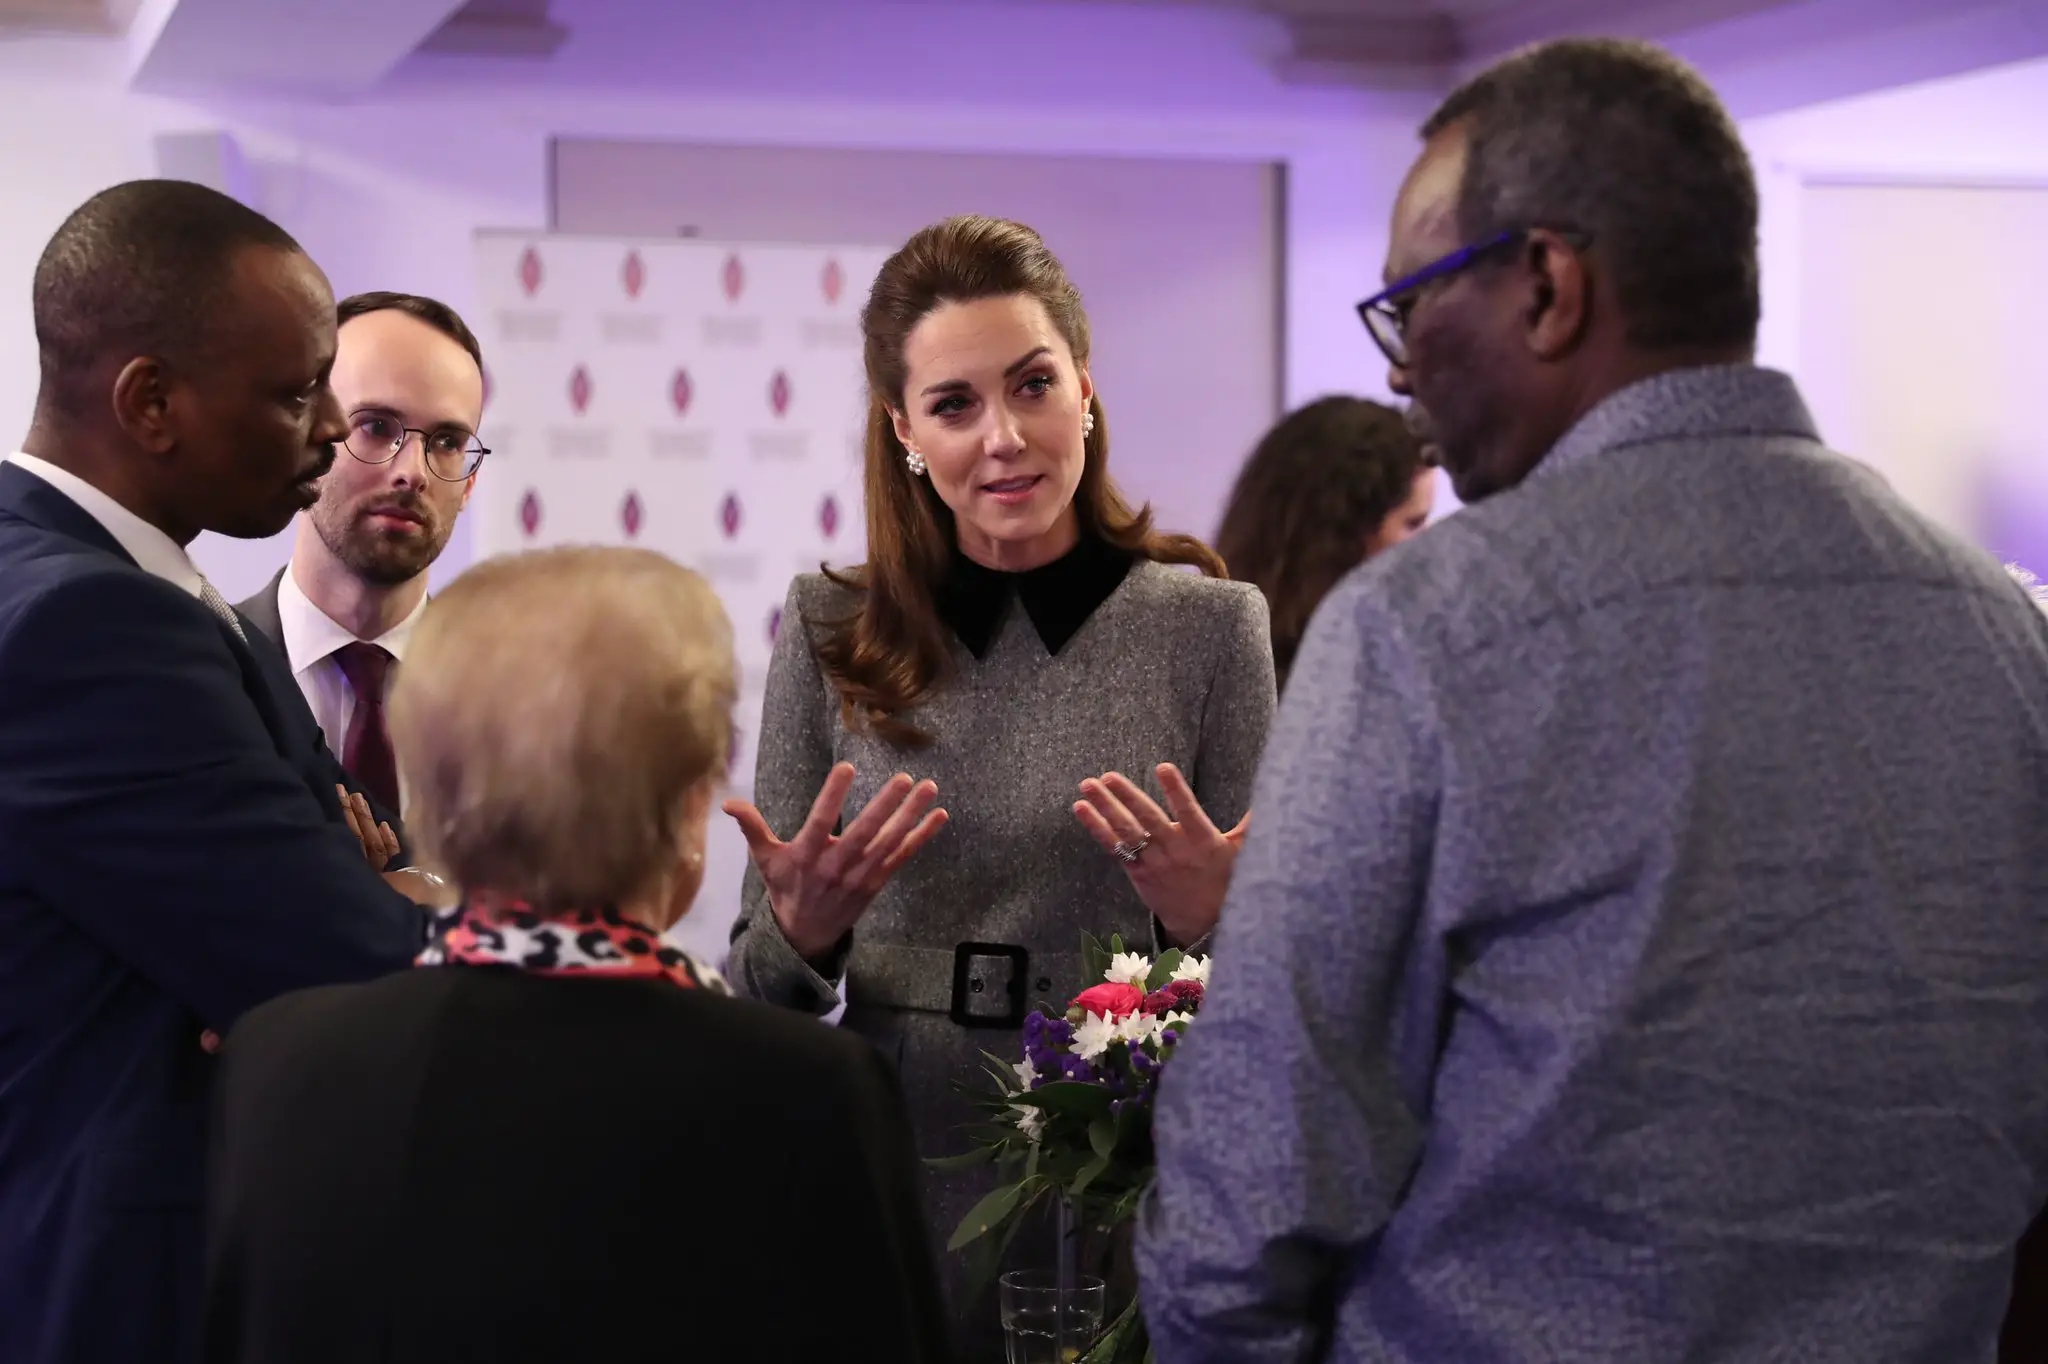 The Duke and Duchess of Cambridge met with the Holocaust Survivors and their families at the Holocaust Memorial Day Service